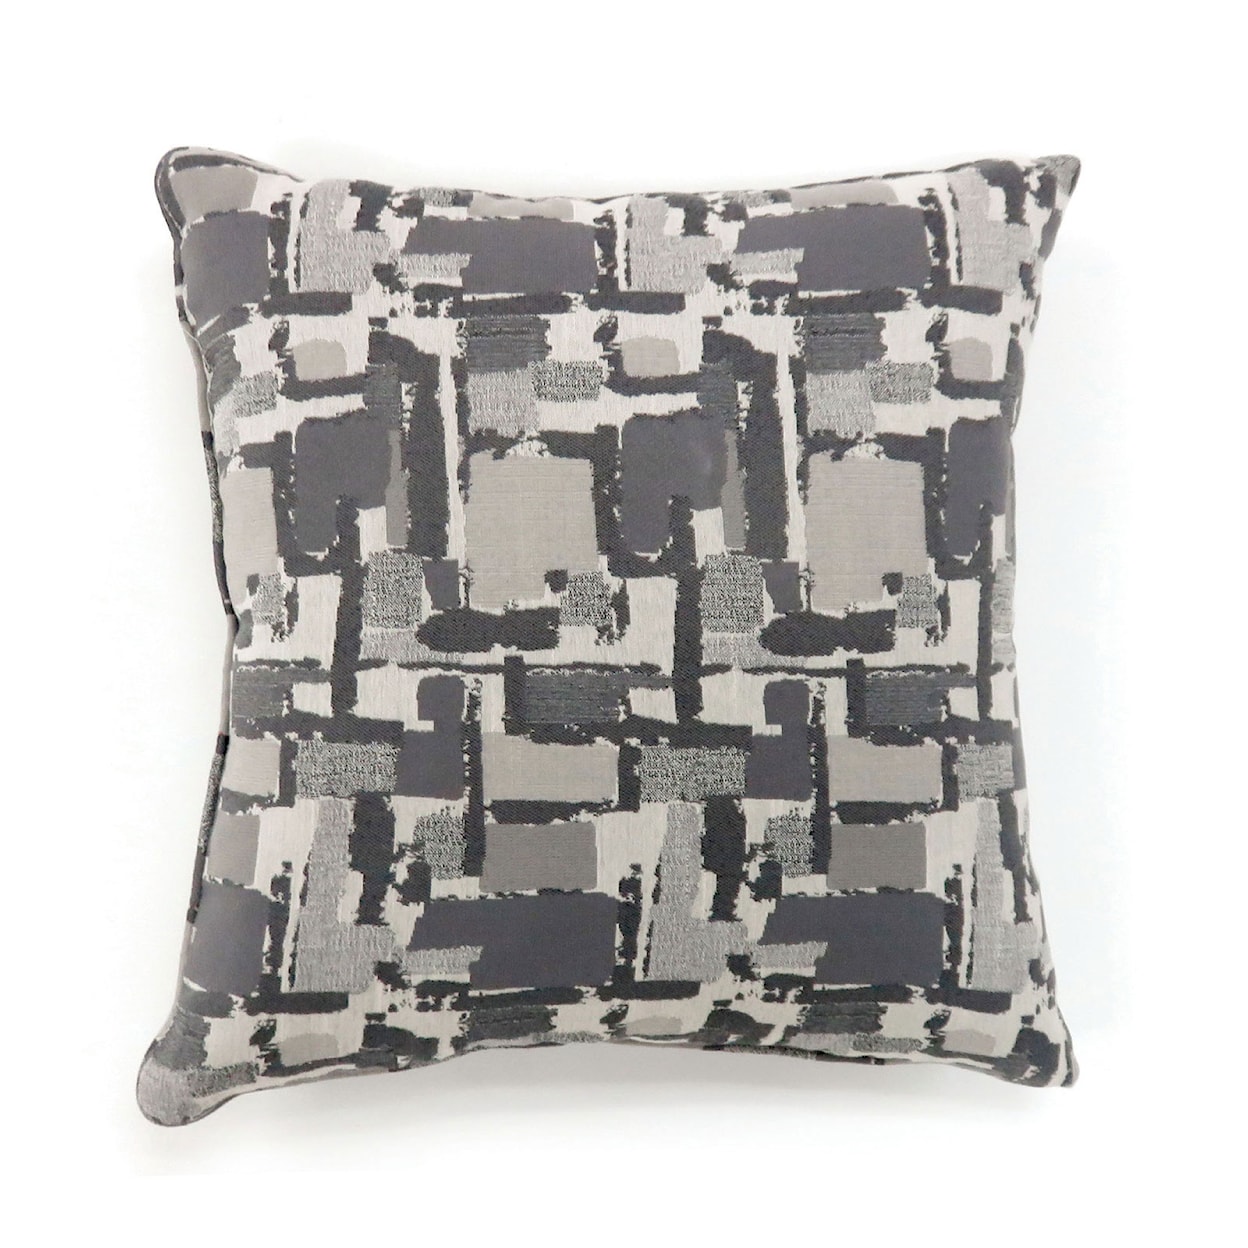 Furniture of America Concrit Set of Two 22" X 22" Pillows, Gray